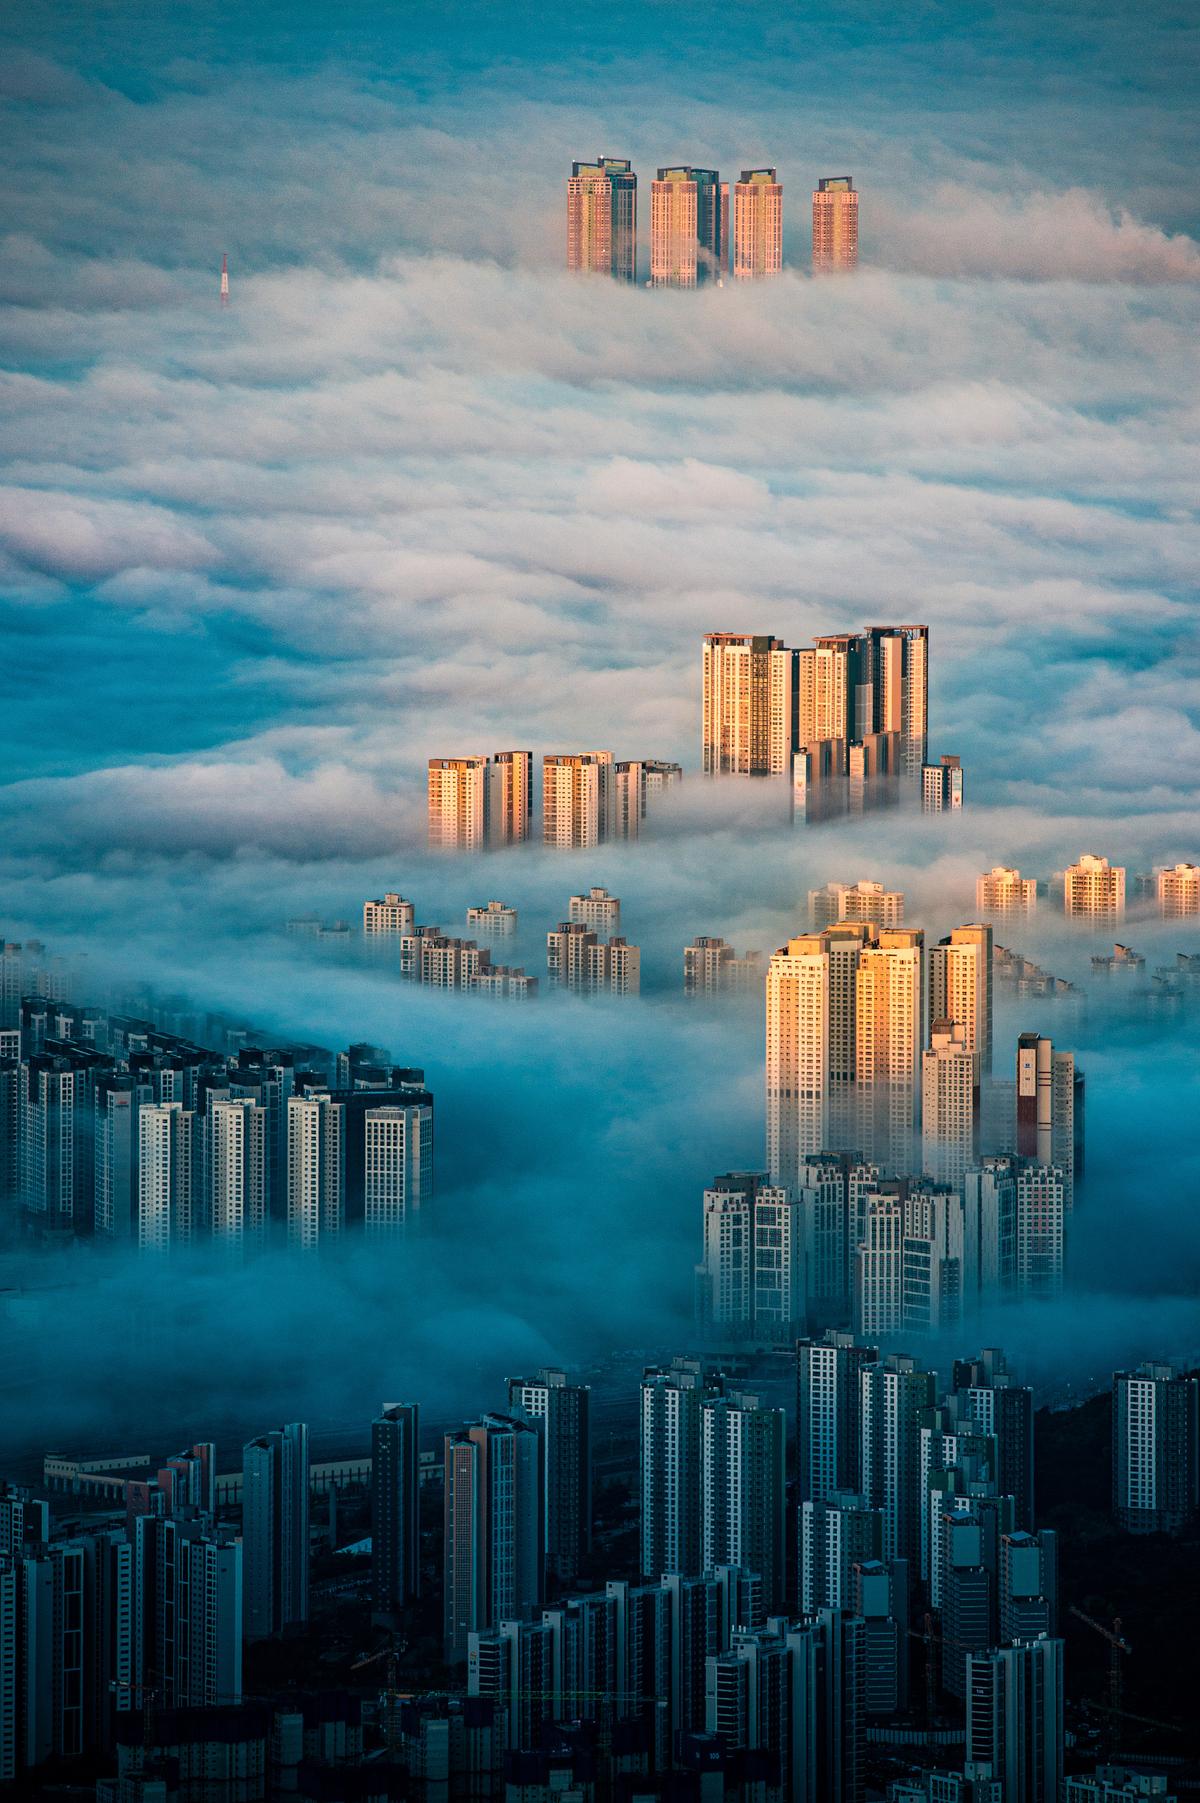 "A City Among the Clouds" by Wonyoung Choi, Korea, Republic Of; “This is a photograph from Bukhansan Mountain in Seoul, South Korea. Lots of people climb the mountain to view the sunrise, but it’s a rare sight to see the city covered in clouds as the sun rises. I've gone there many times and was lucky to finally see it. I feel gratitude towards Mother Nature for changing Seoul's architecture from monotonous to colorful.” (© Wonyoung Choi, Korea (Republic of), Winner, National Awards, Architecture, 2022 Sony World Photography Awards)